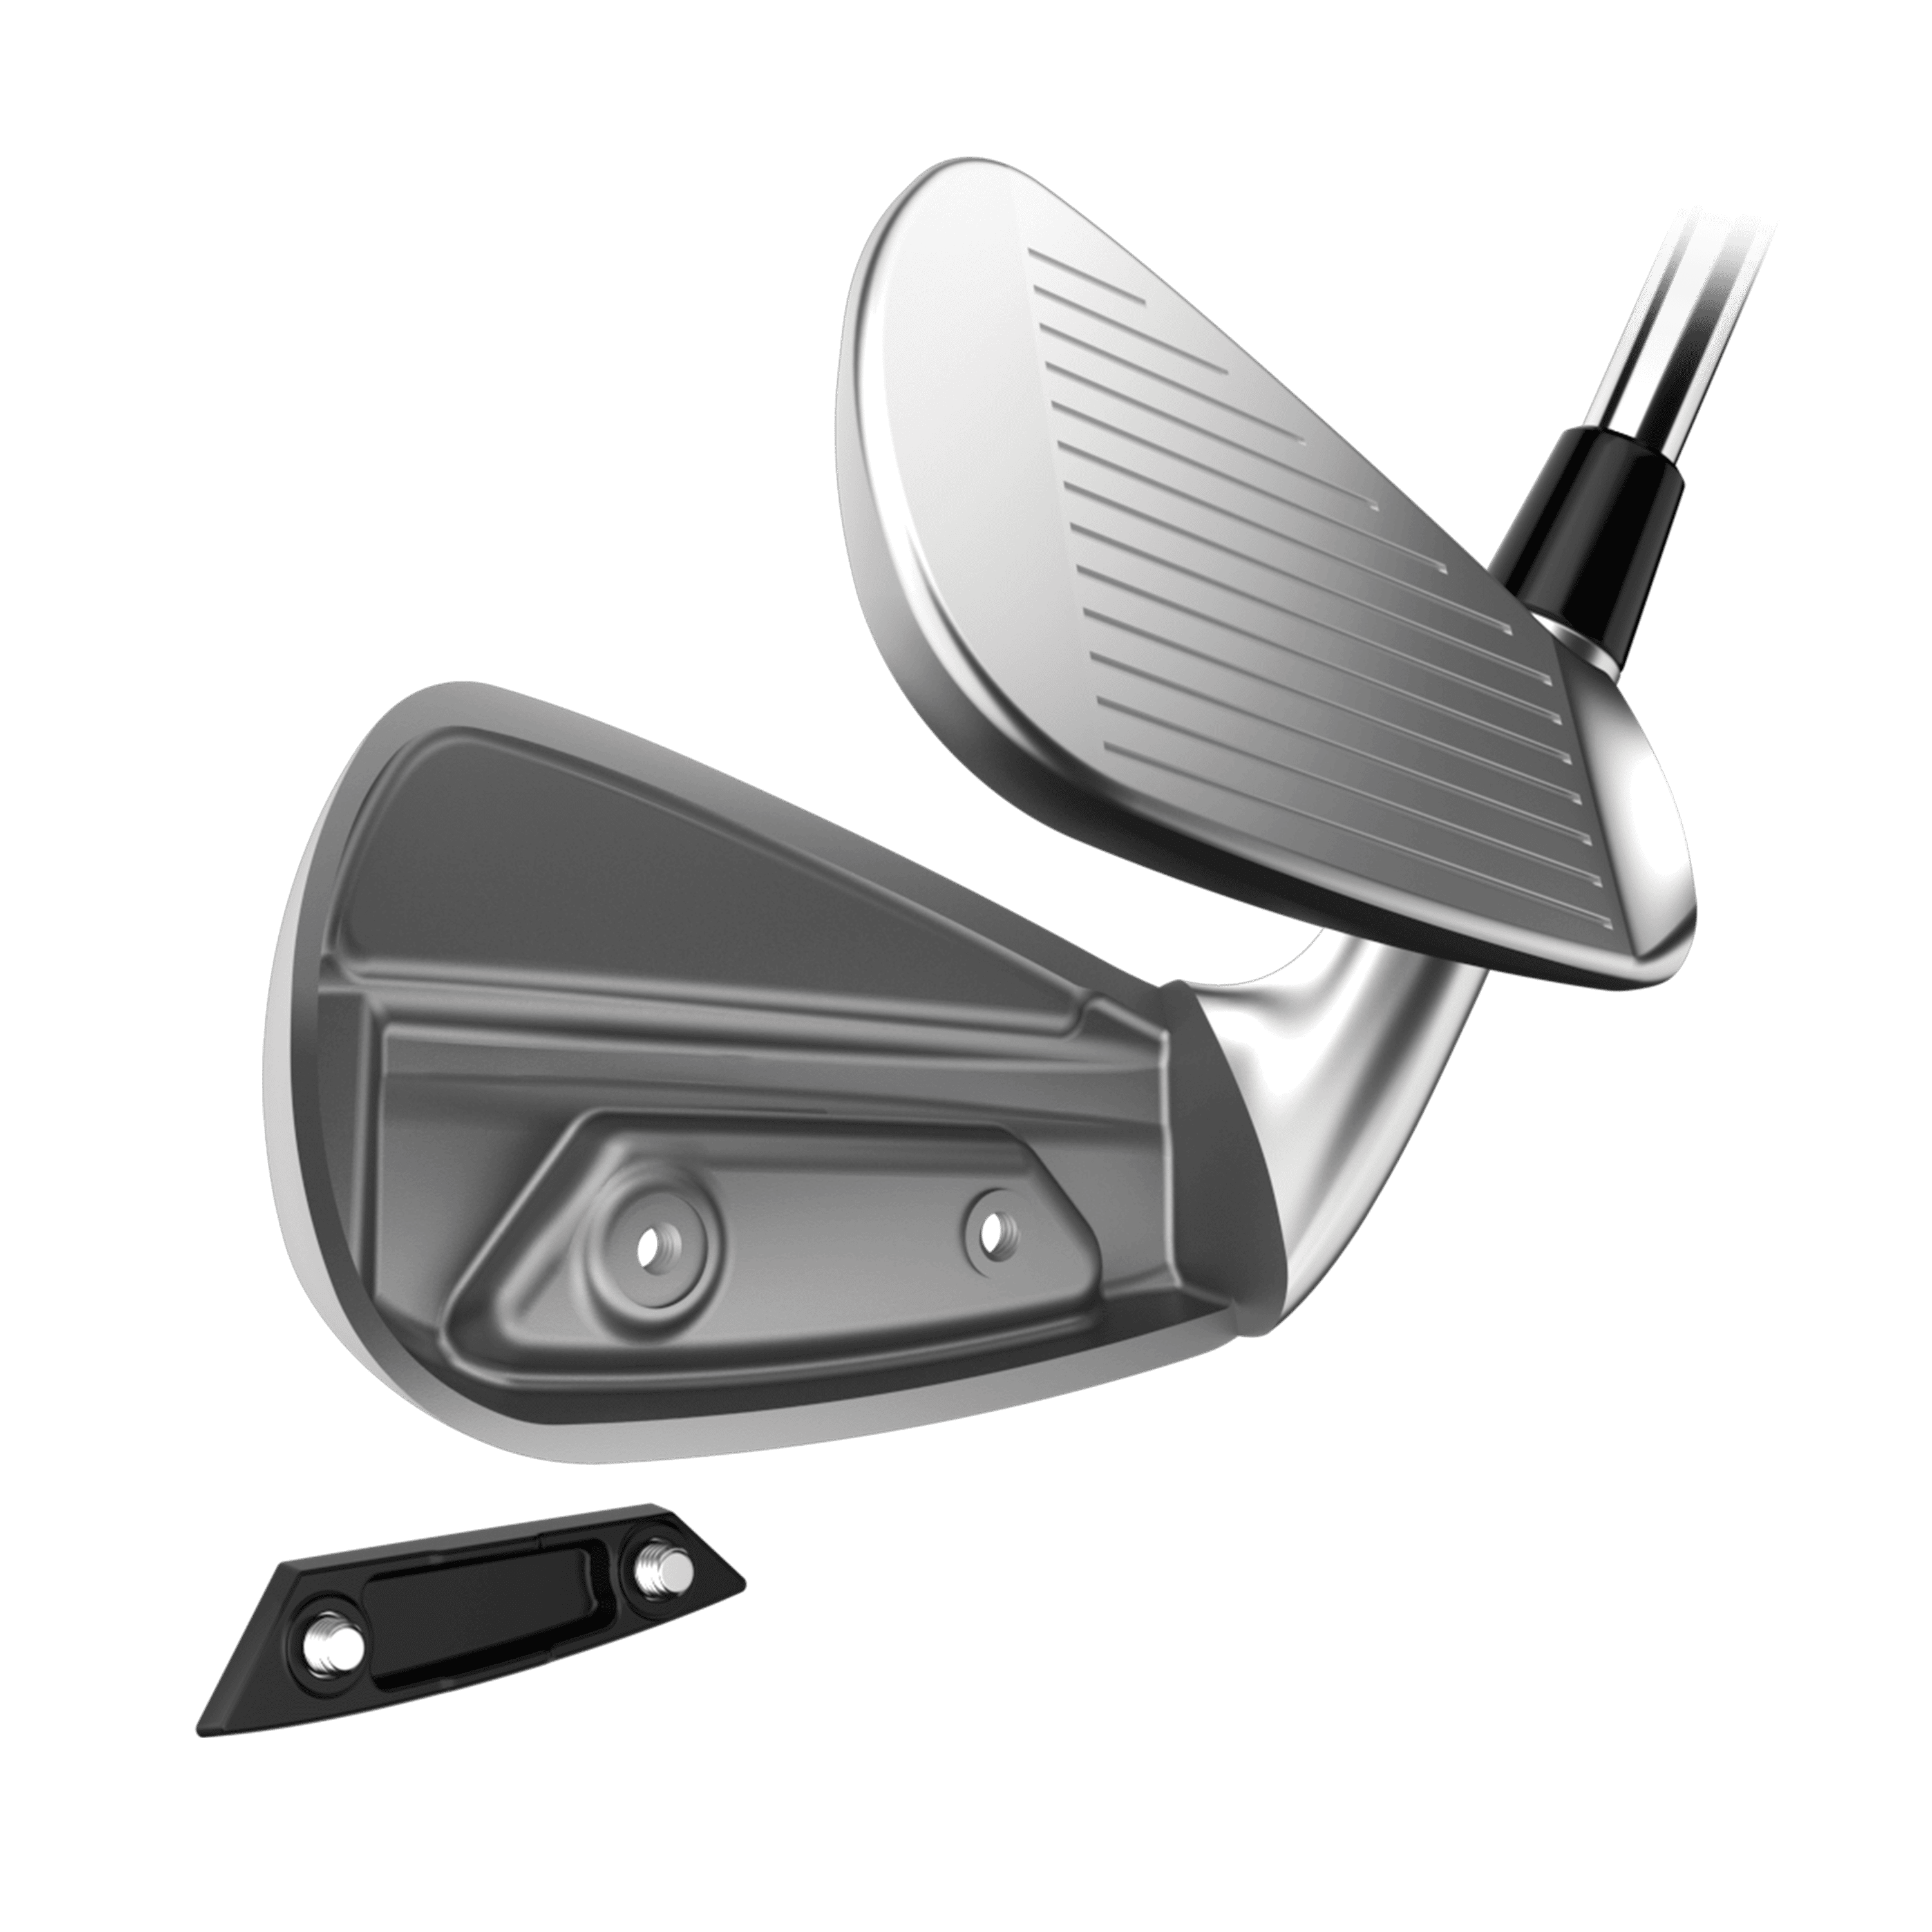 New Progressive Face Design For Incredible Distance with Added Control